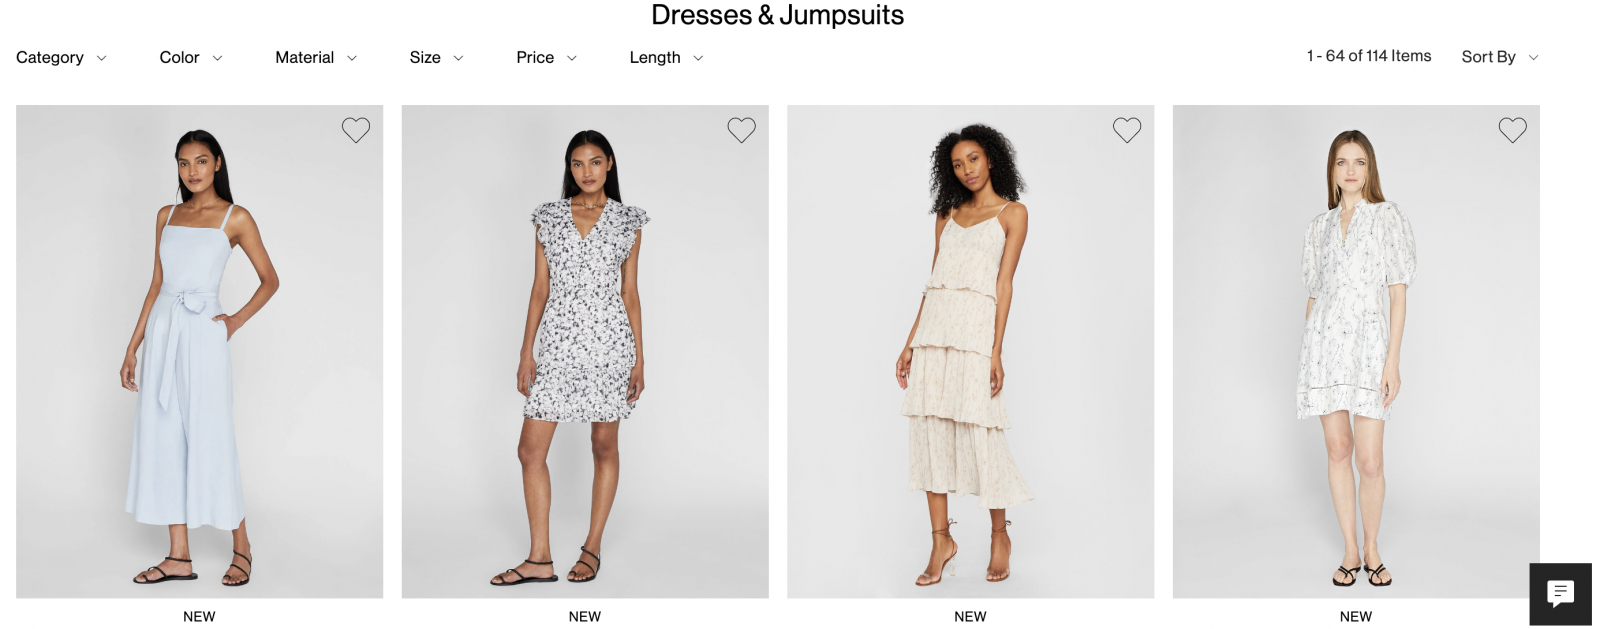 Save on dresses with Club Monaco coupons